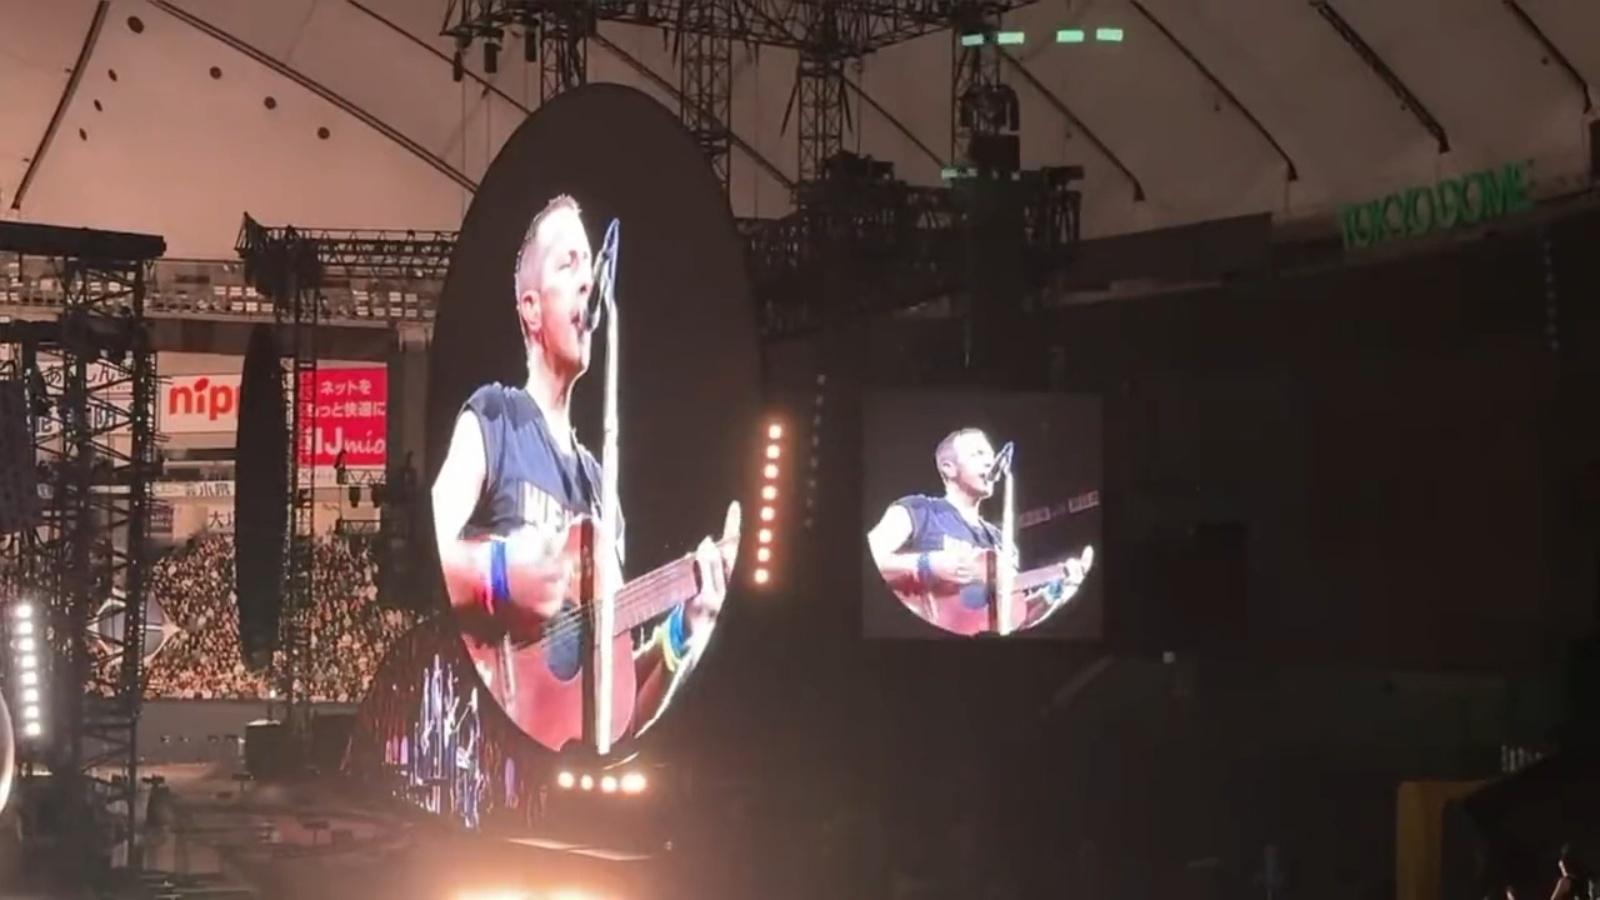 Coldplay lead singer Chris Martin performs with an acoustic guitar on stage at the Tokyo Dome stadium.